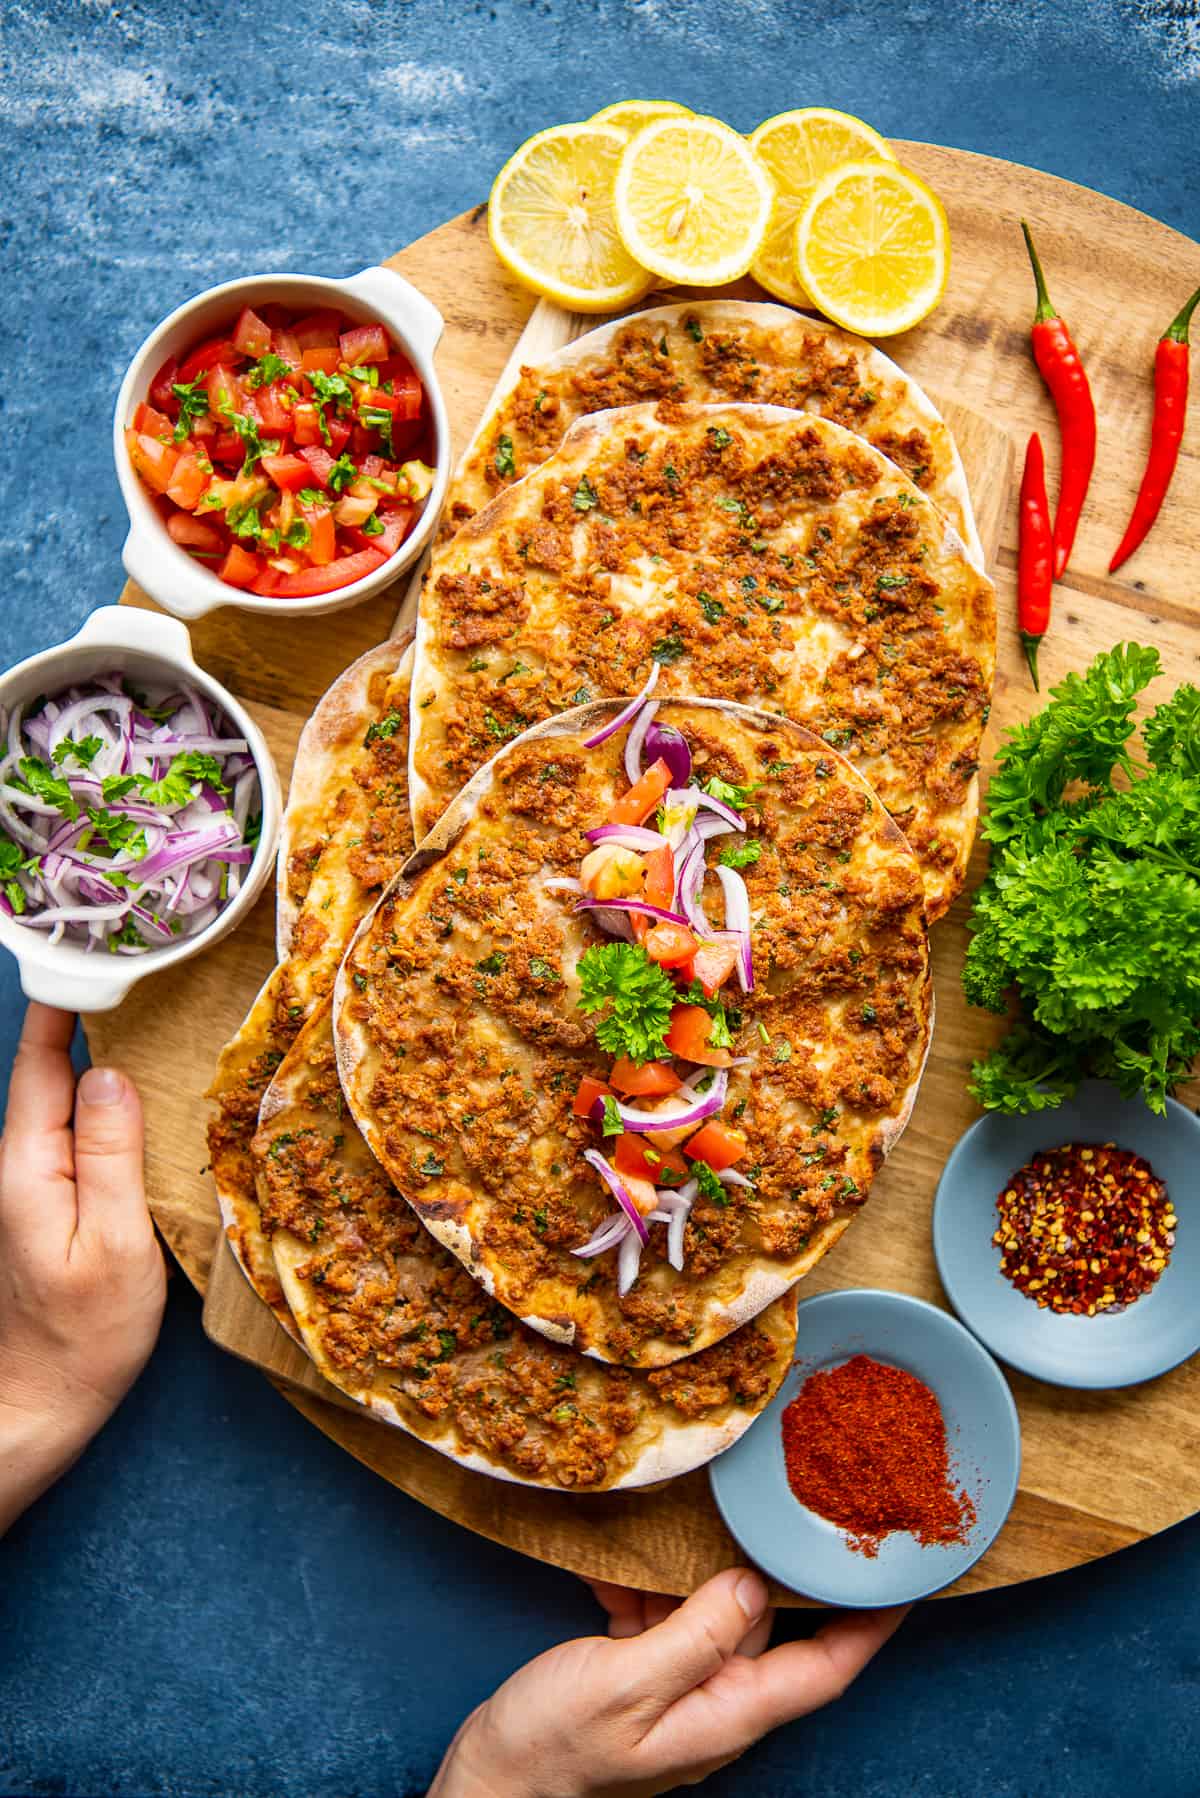 Hands holding a wooden board with lahmacun, salads and spices on it.